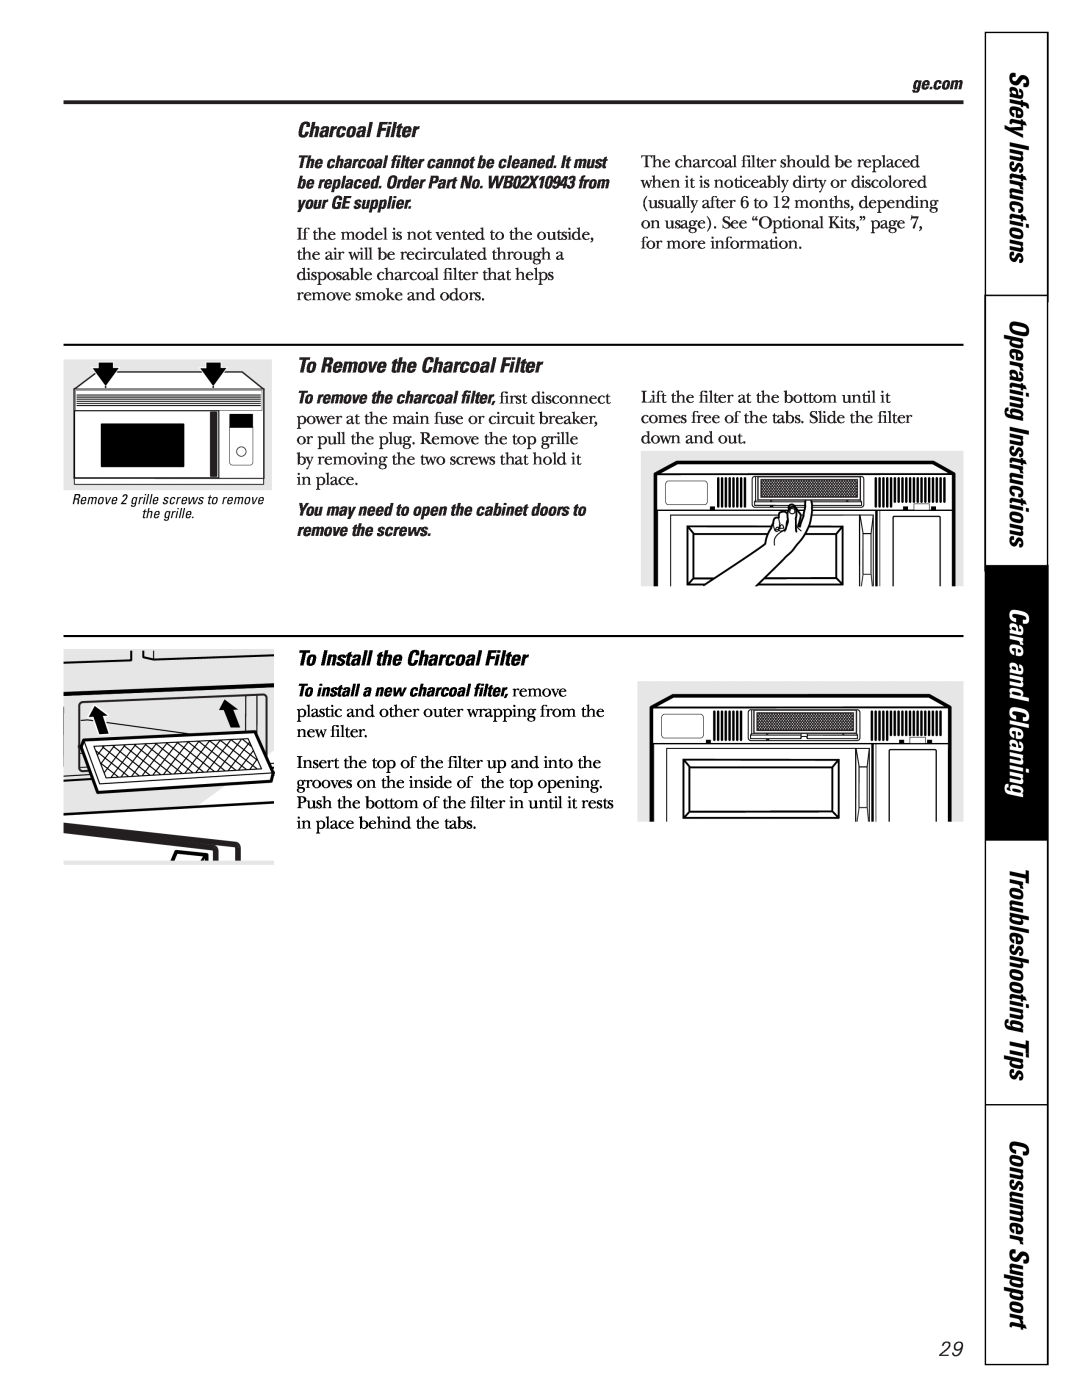 GE JVM1790 Operating Instructions Care, To Remove the Charcoal Filter, To Install the Charcoal Filter, Safety, ge.com 